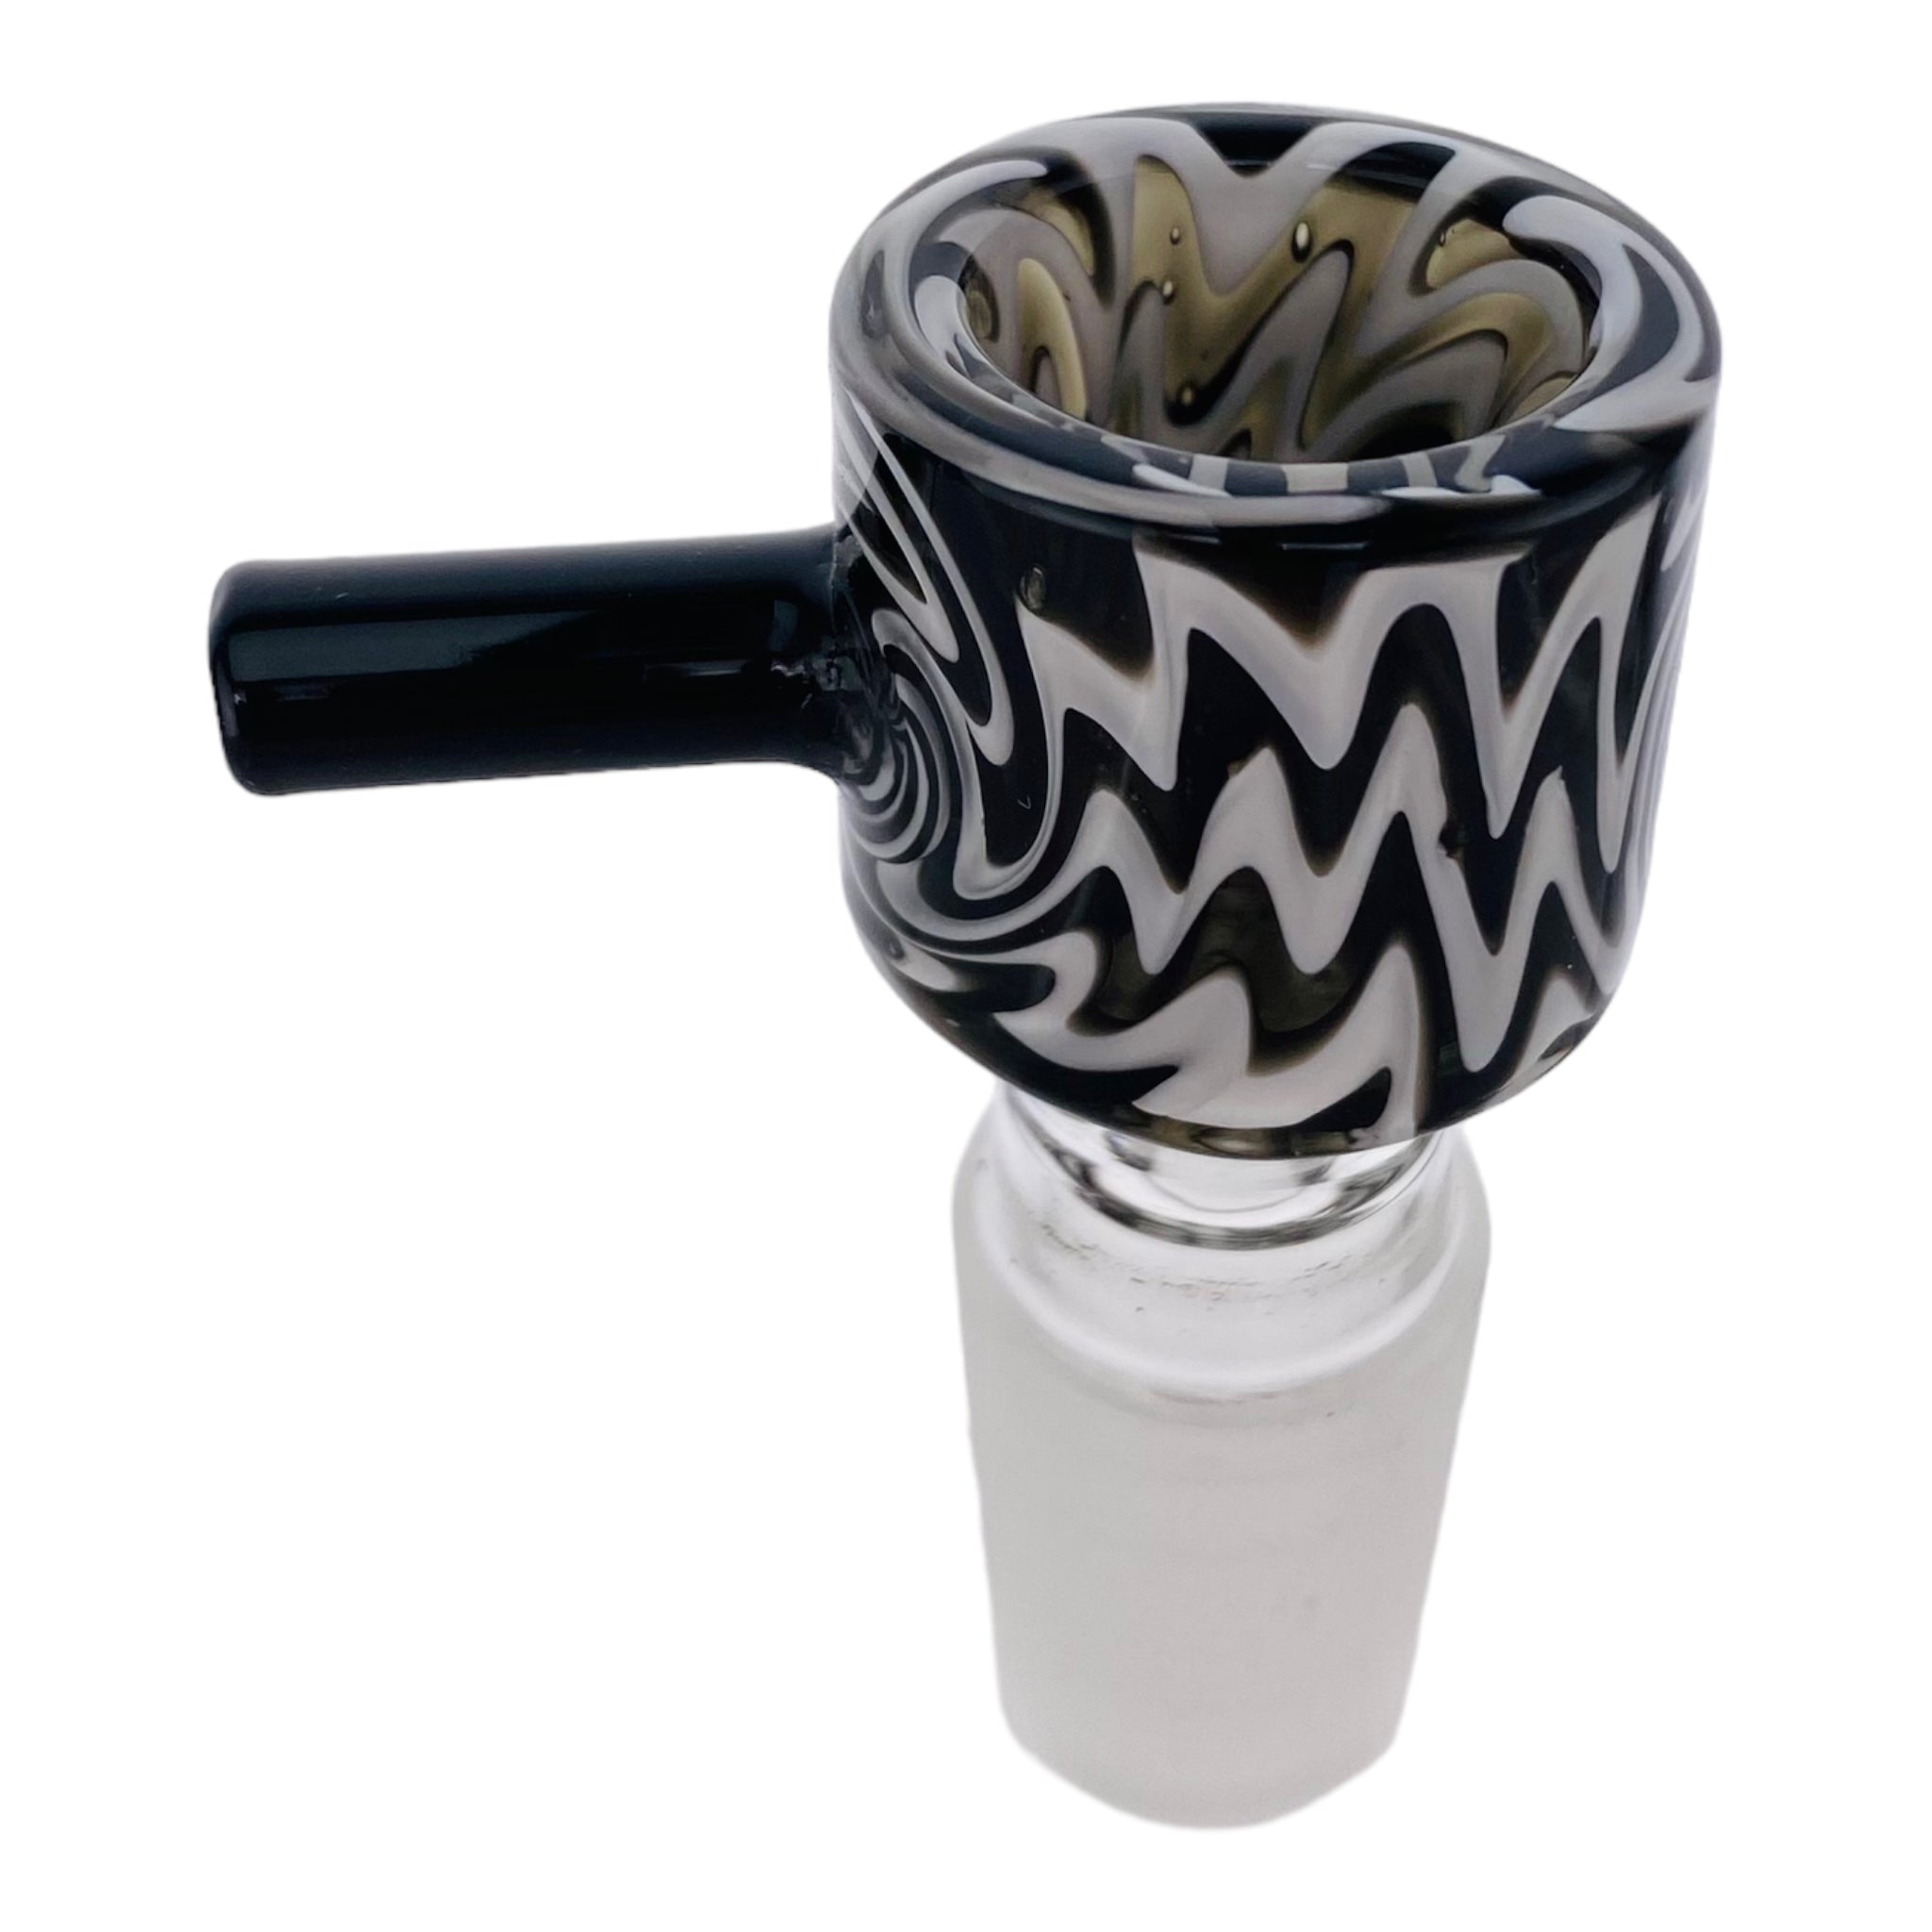 18mm Flower Bowl - Black And White Cylinder Straight Wall Bong Bowl Piece